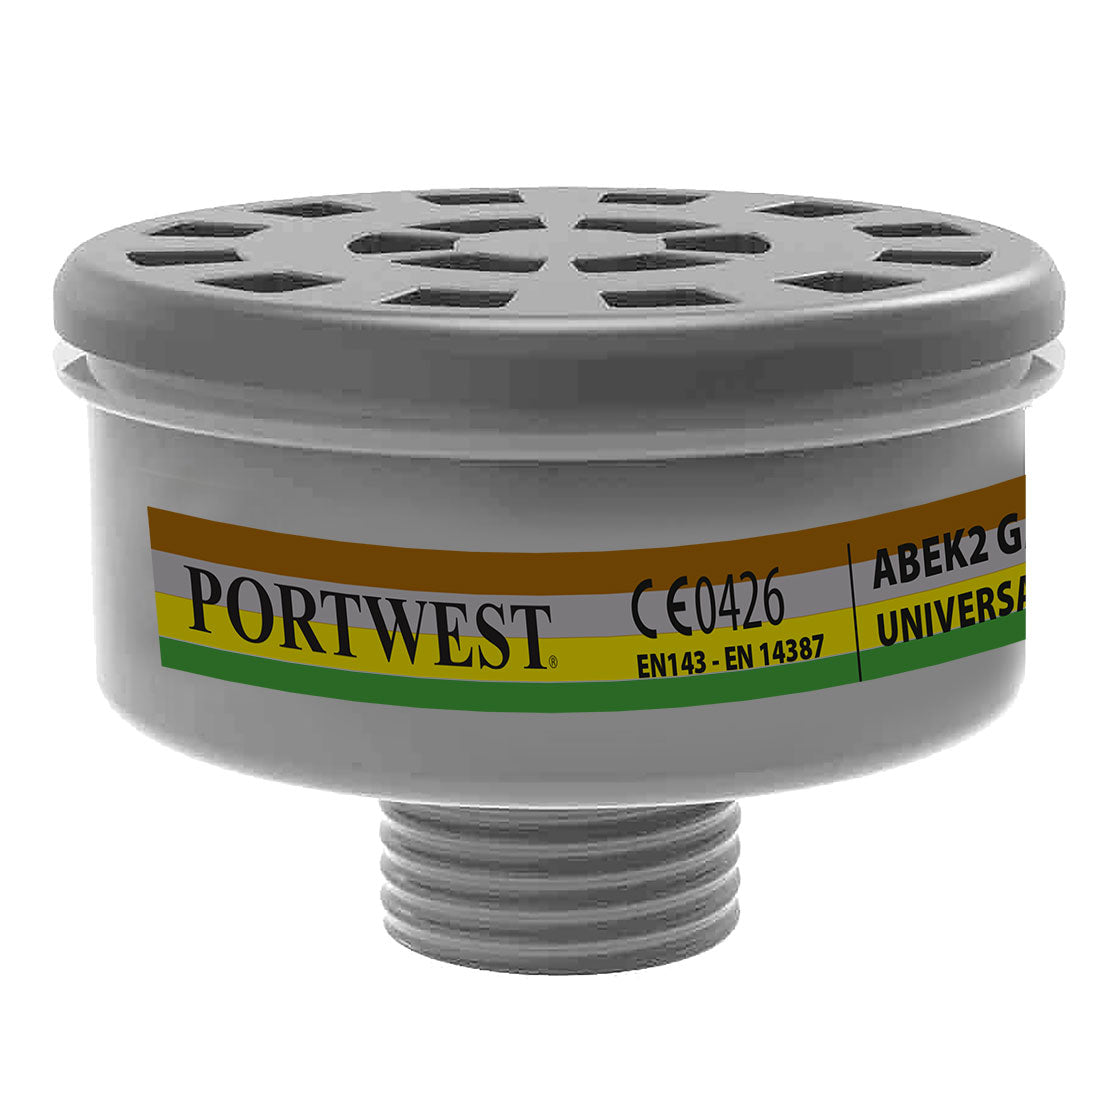 Portwest ABEK2 Gas Filter Universal Thread (Pack of 4)